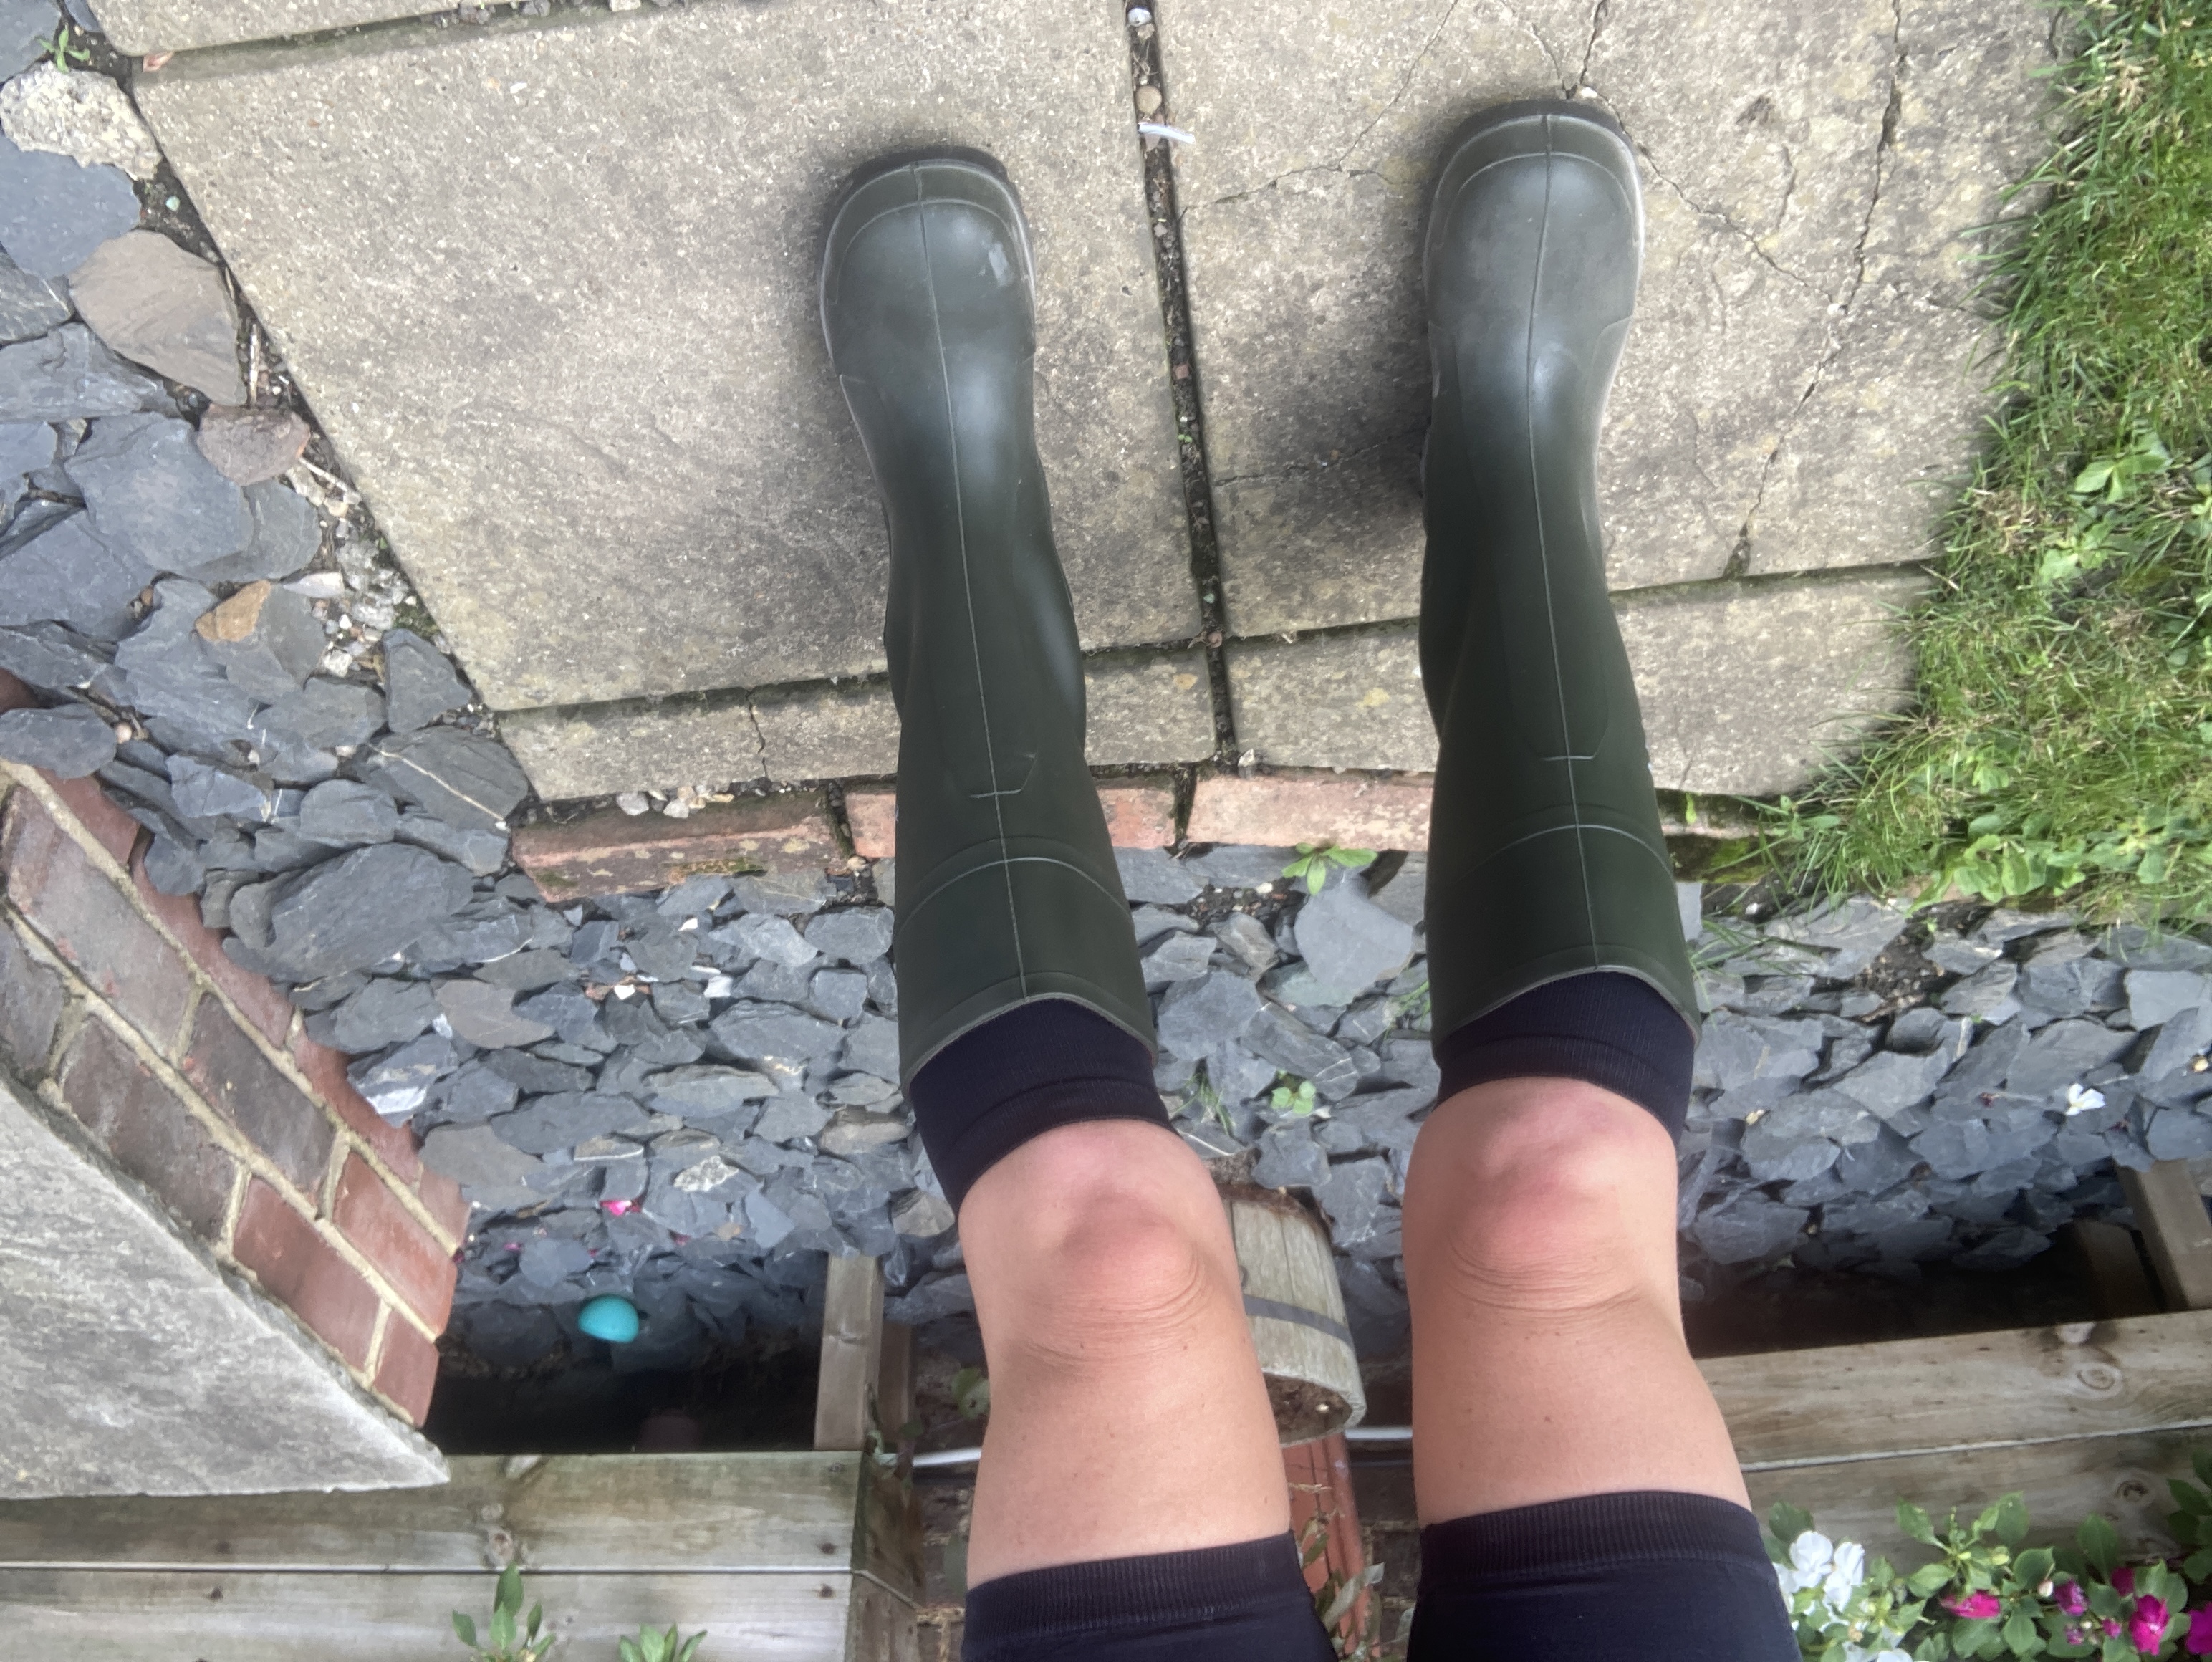 Wellies in close-up